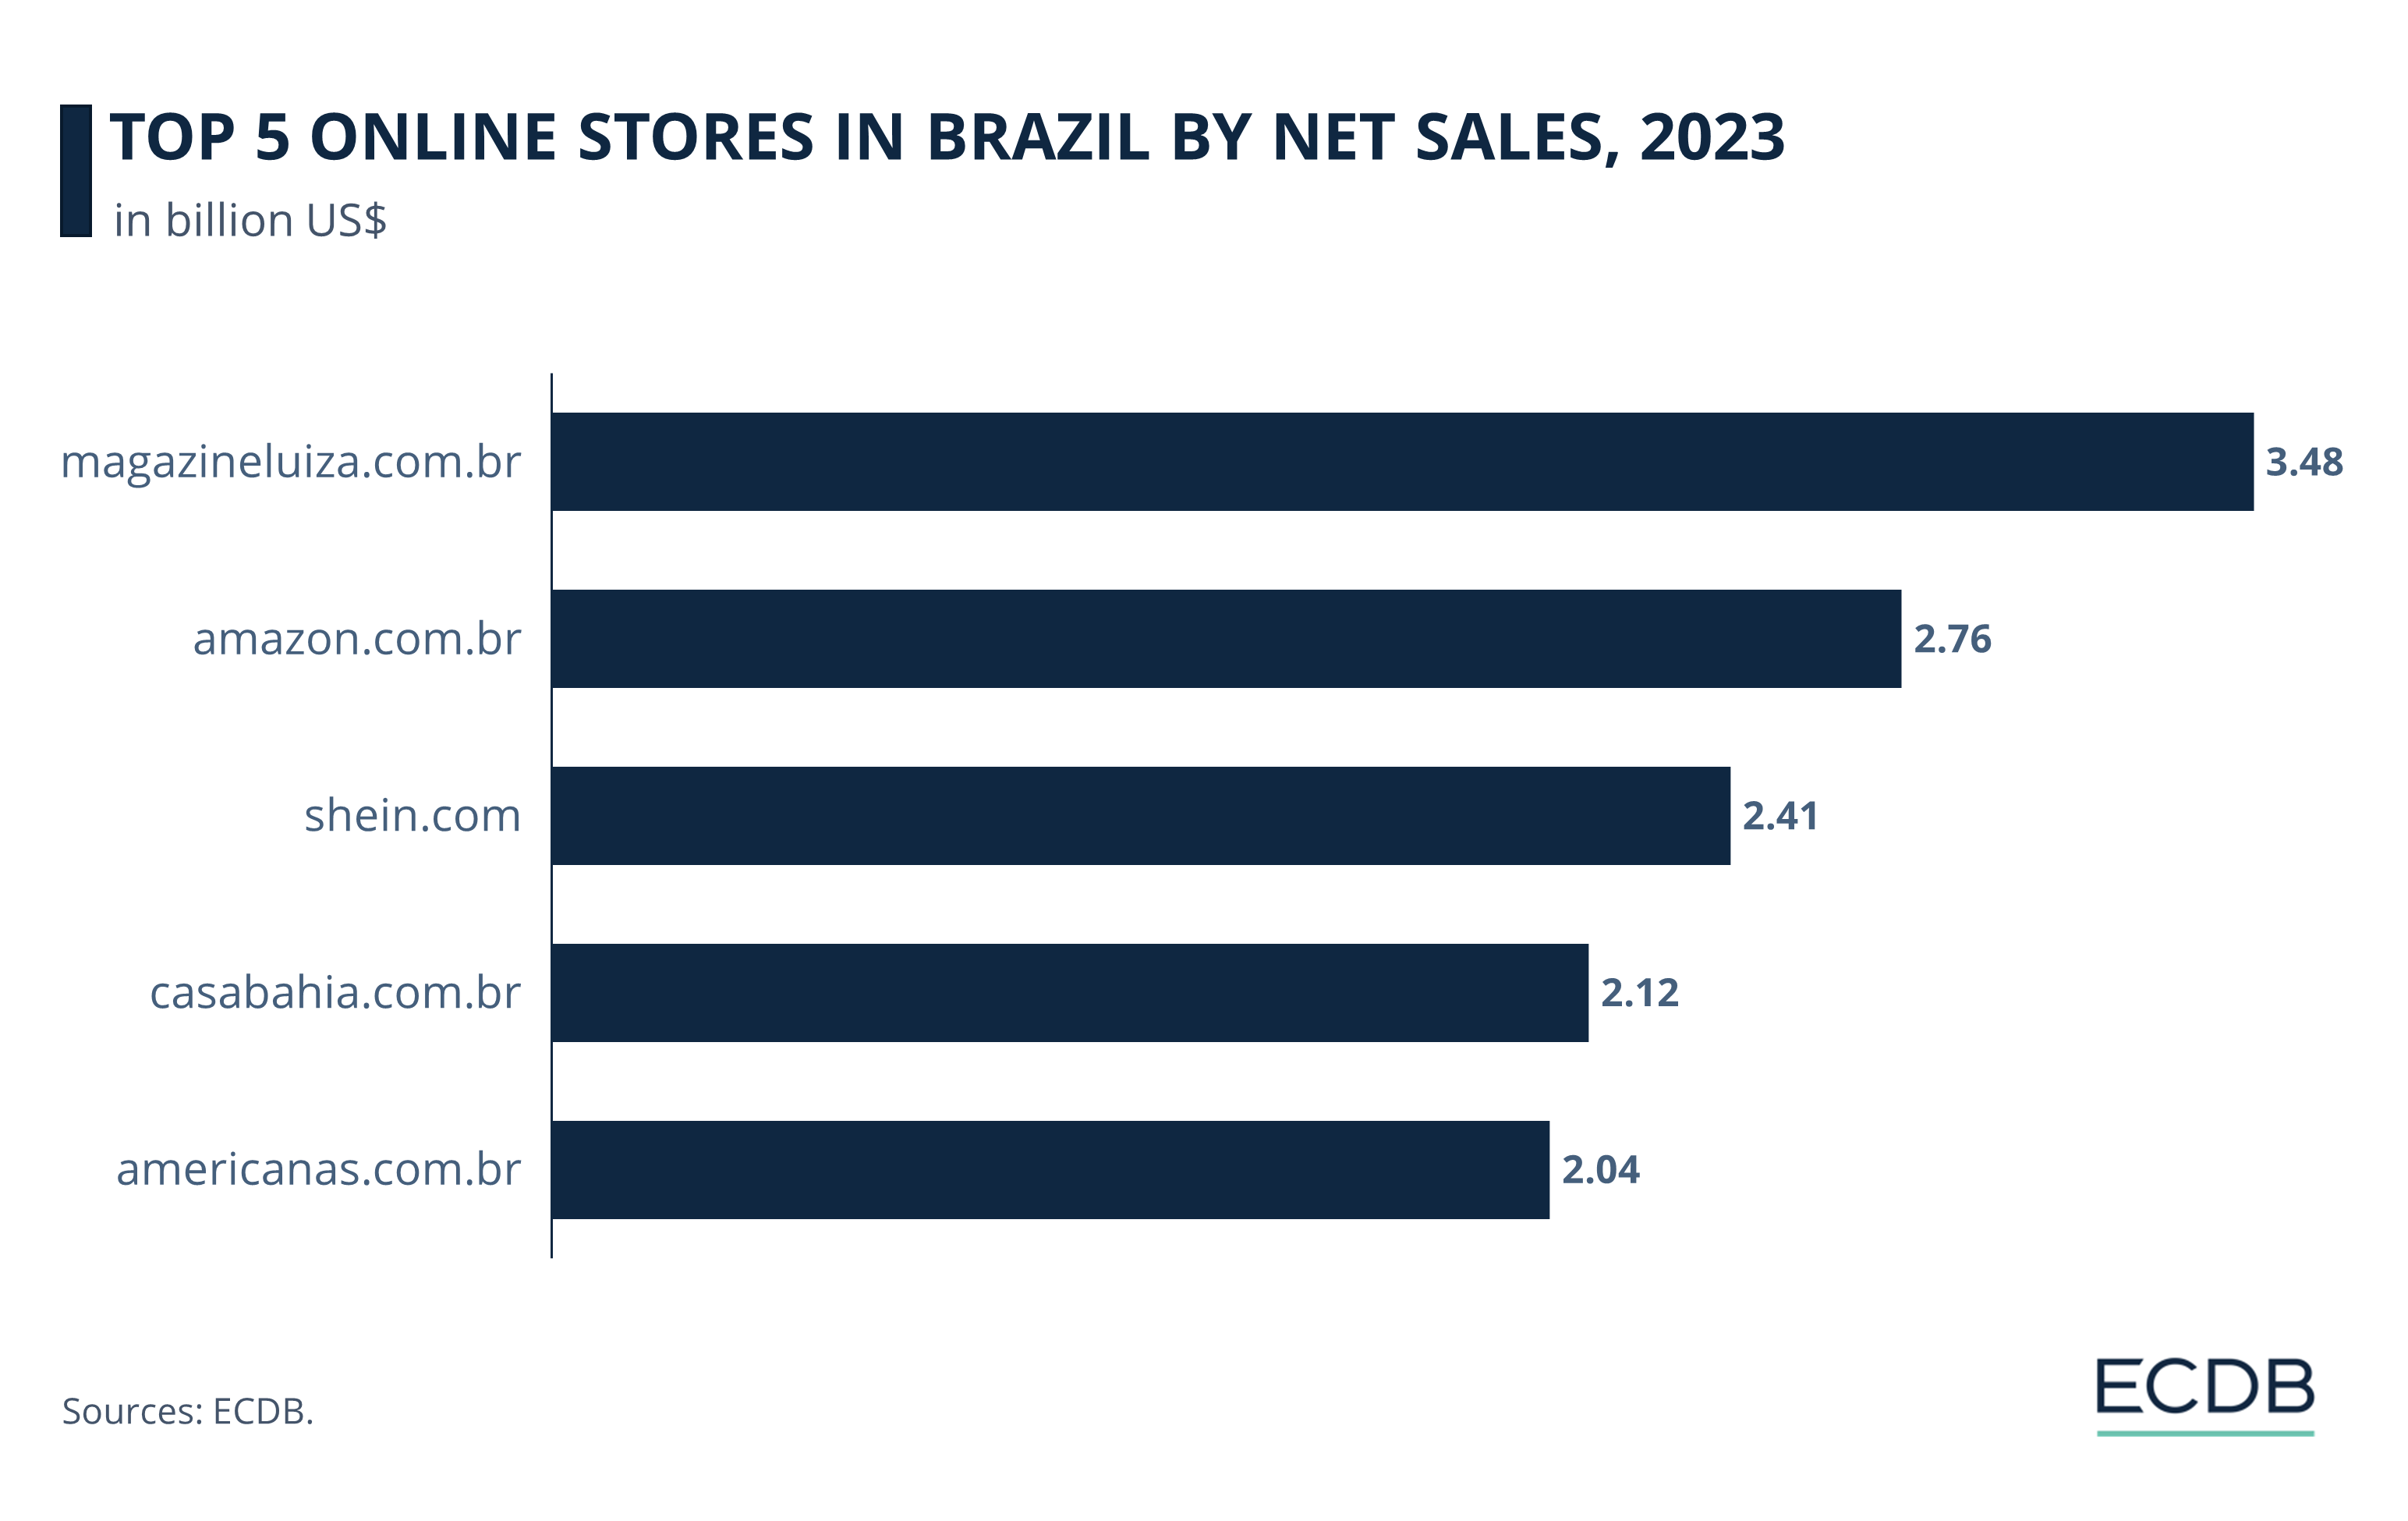 Top 5 Online Stores in Brazil by Net Sales, 2023